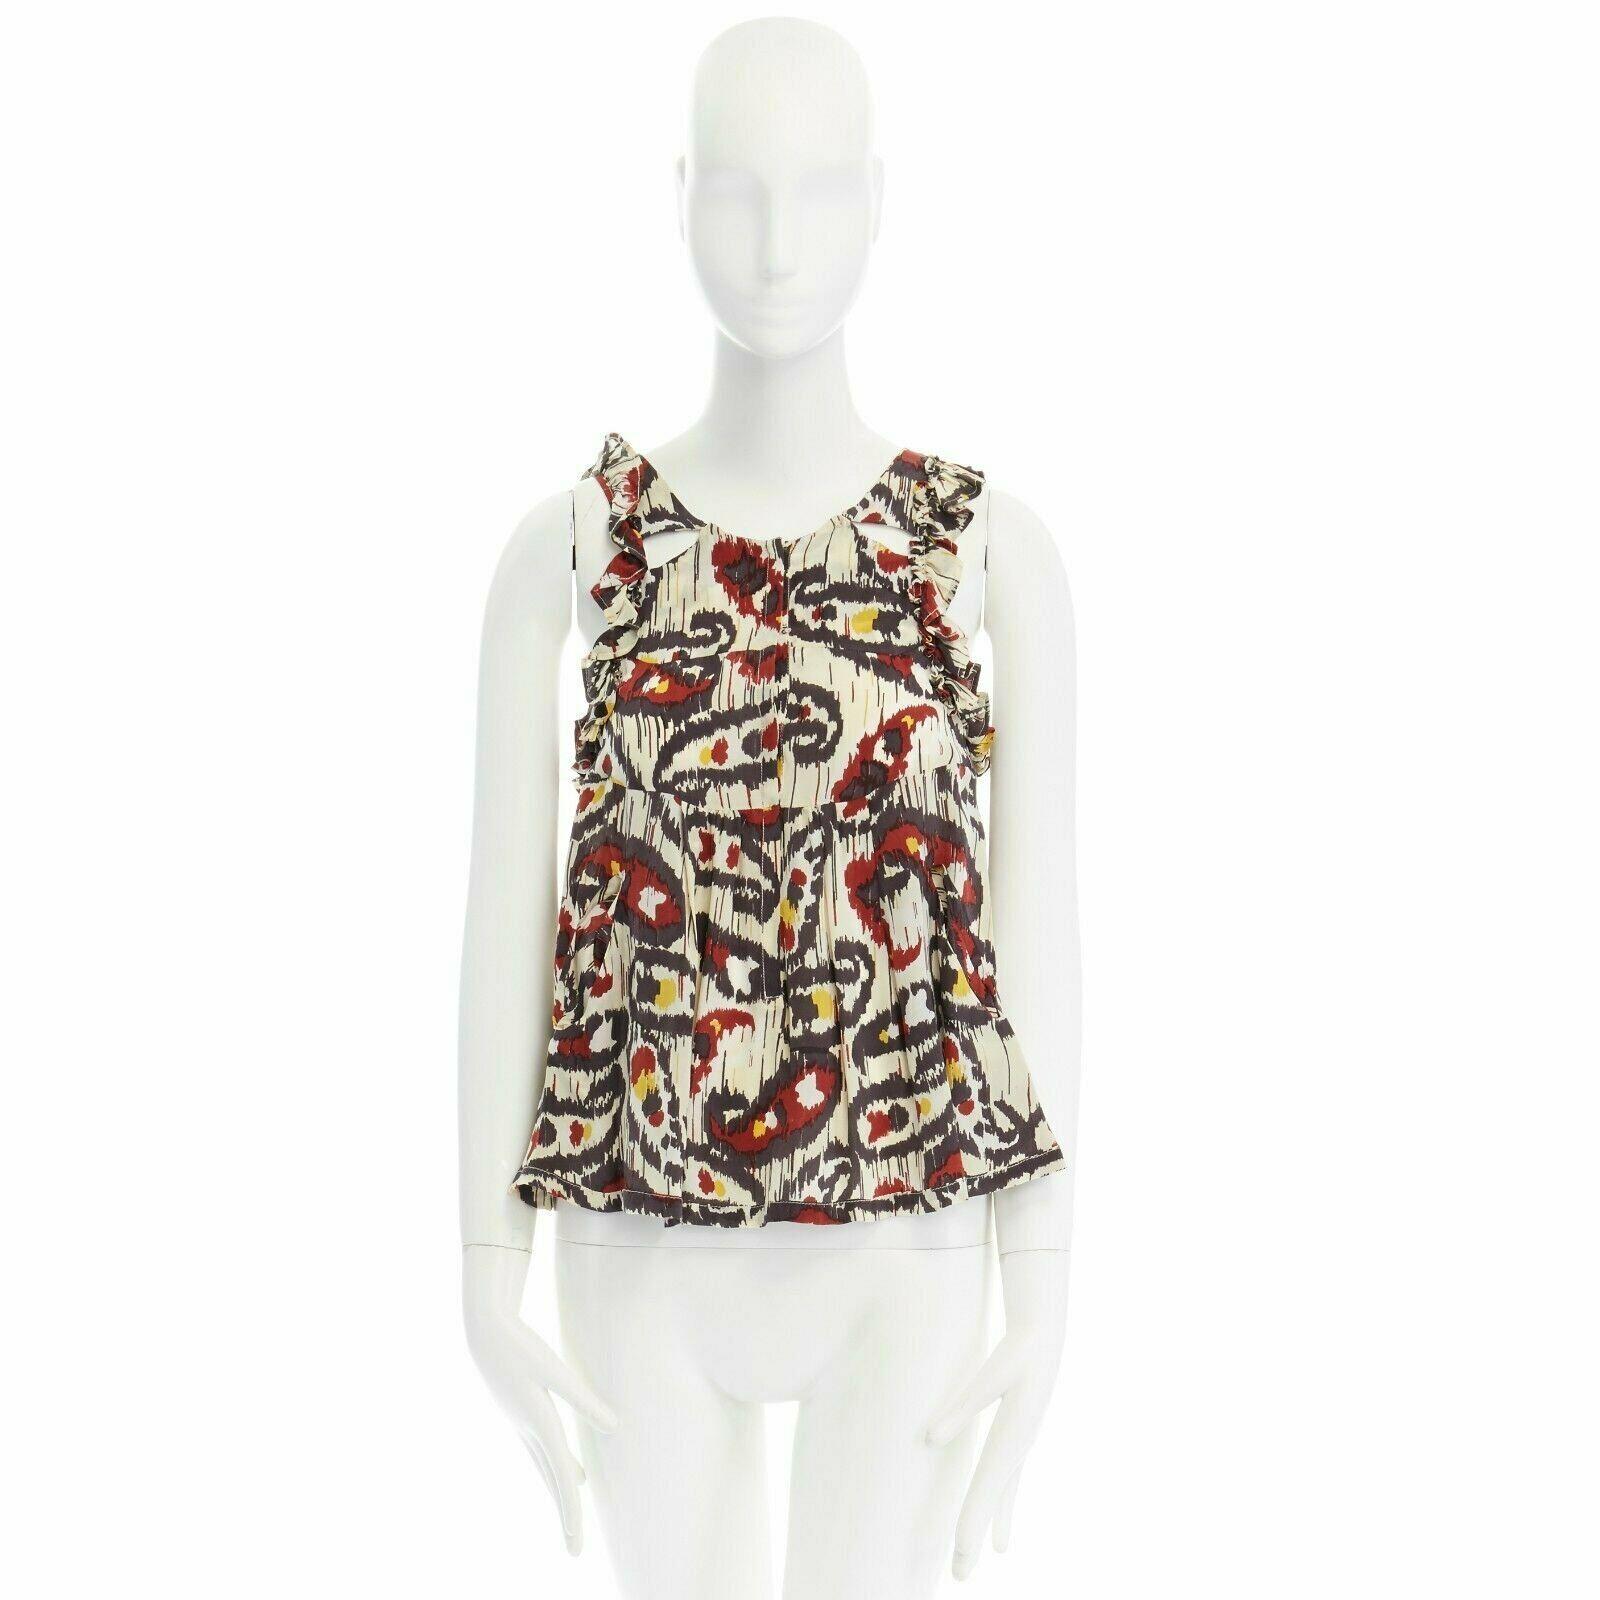 ISABEL MARANT Ikat cream ethnic print silk ruffle cut-out top FR34 XS US2 UK6 
Reference: TGAS/A00034 
Brand: Isabel Marant 
Designer: Isabel Marant 
Material: Silk 
Color: White 
Pattern: Other 
Closure: Hook & Eye 
Extra Detail: White with ethnic